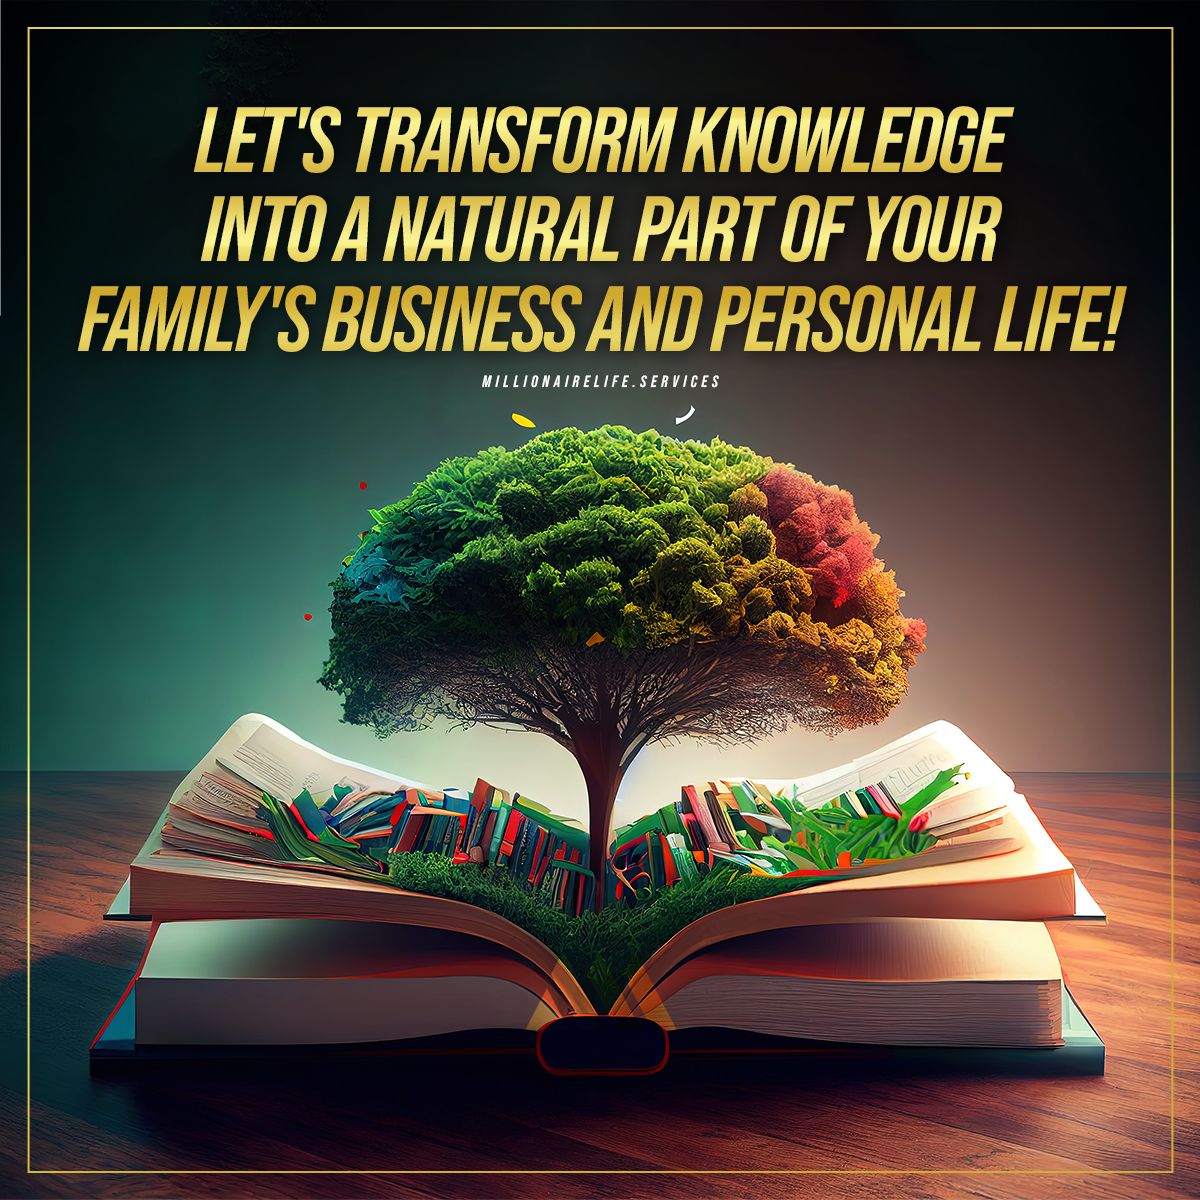 📚 Legacy creation involves forethought and dedication. Discover how to make it an educational journey with Cliff Locks' easy-to-achieve steps. Let's transform knowledge into a natural part of your family's business and personal life! 📘🧑‍🏫

#LegacyEducation #Knowledge